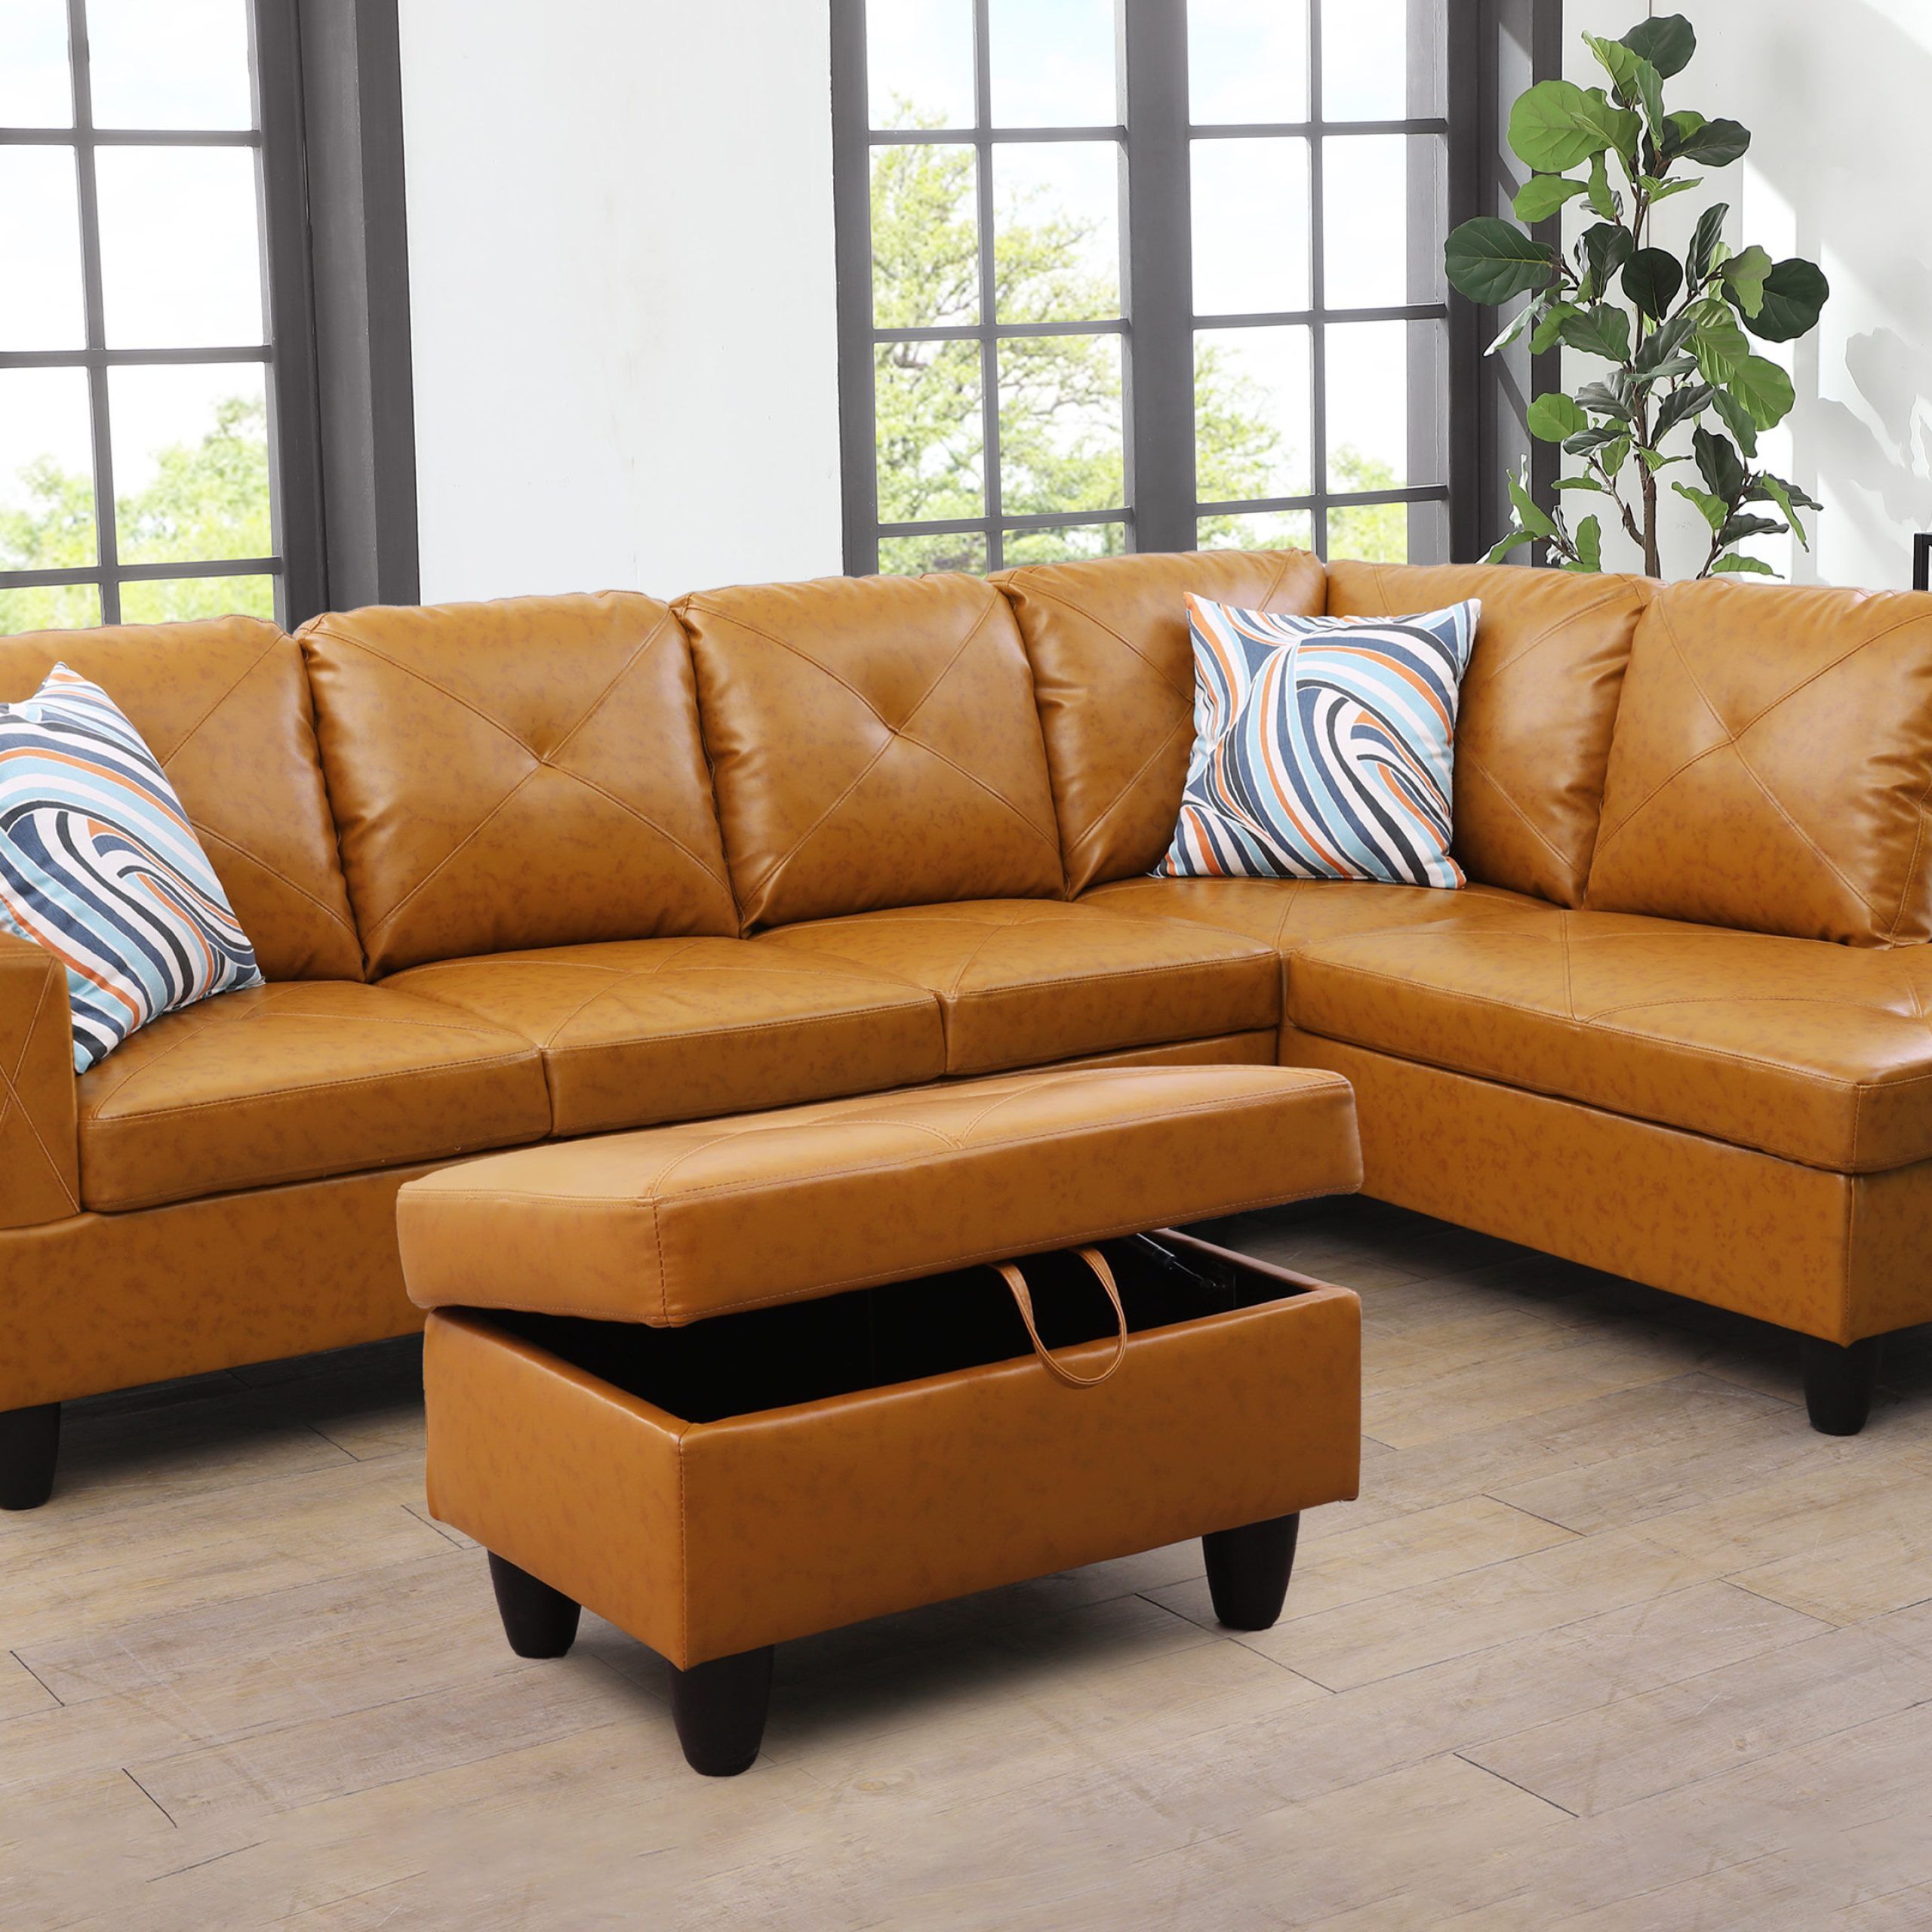 Ebern Designs 3 – Piece Vegan Leather Sectional & Reviews | Wayfair In Faux Leather Sectional Sofa Sets (View 8 of 15)